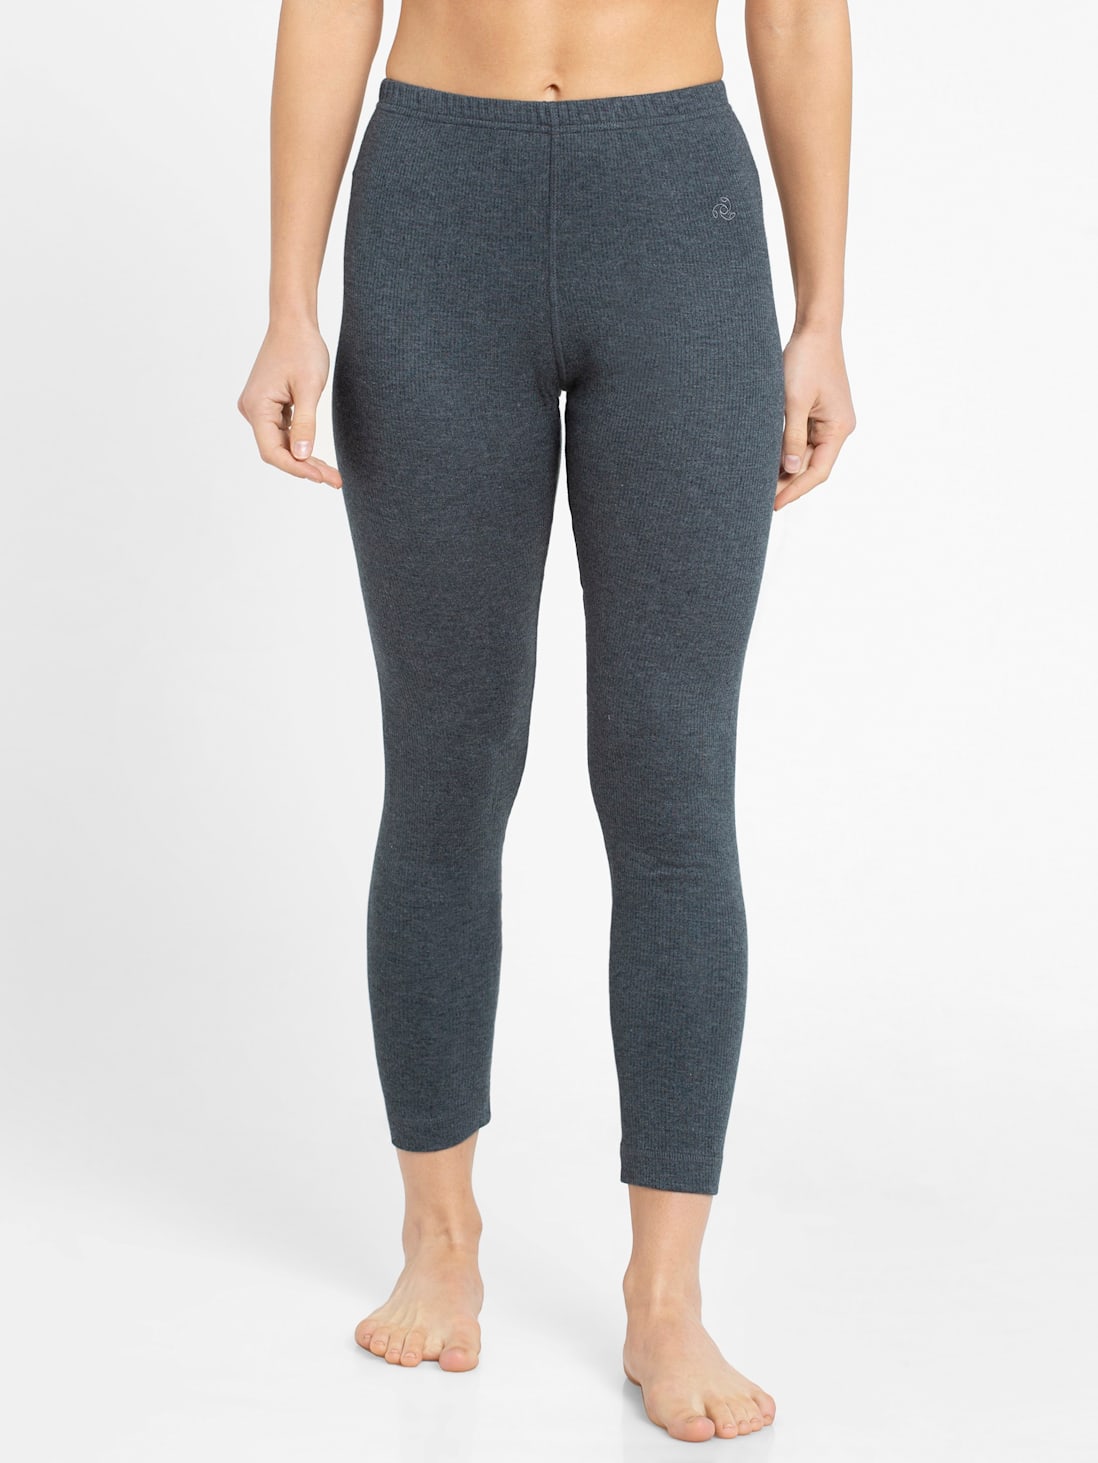 Fleece Lined Thermal Leggings – My Life's a Movie